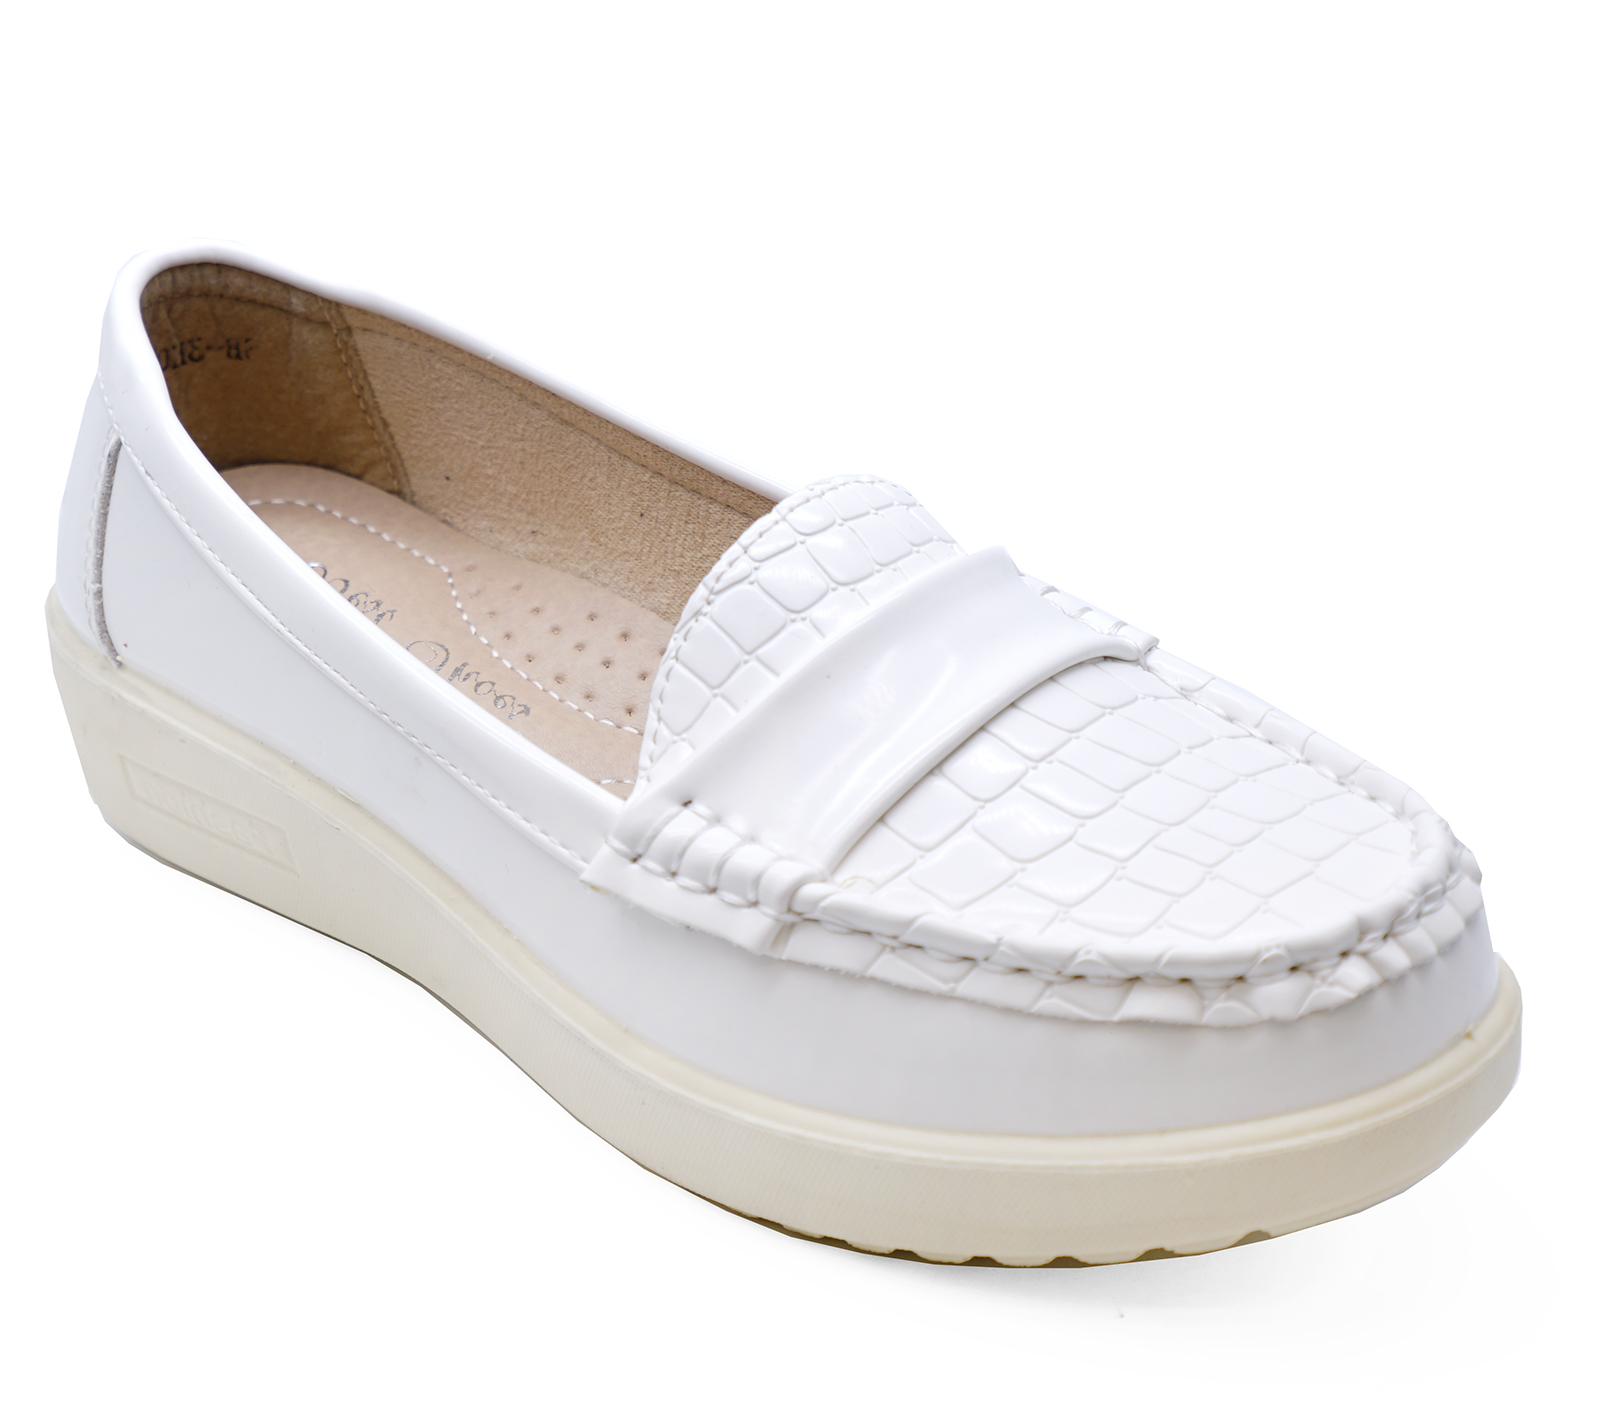 LADIES WHITE SLIP-ON LOAFERS MOCCASIN 